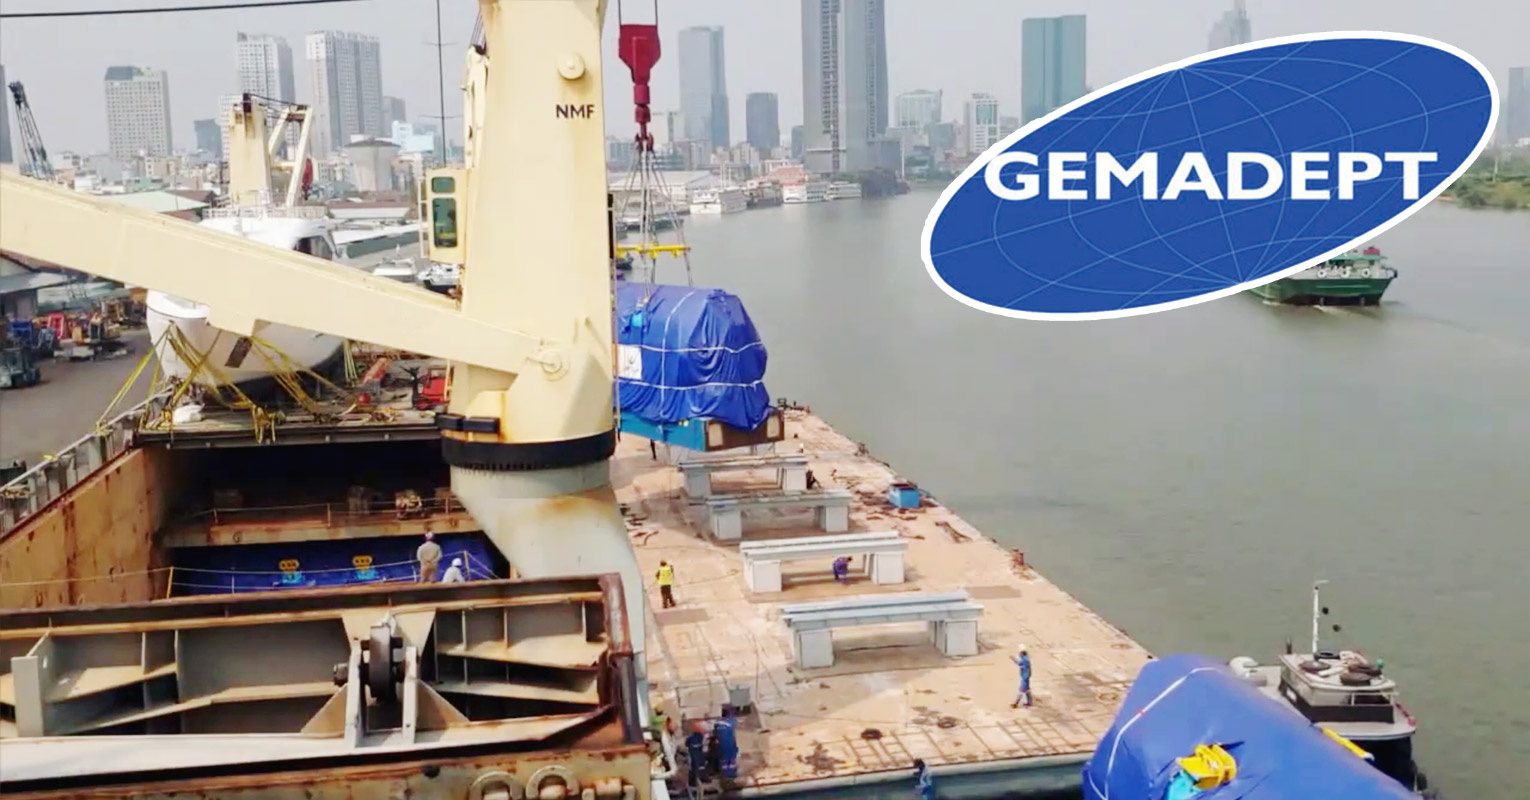 Gemadept transport 12 main engines for 200MW Cambodia power plant